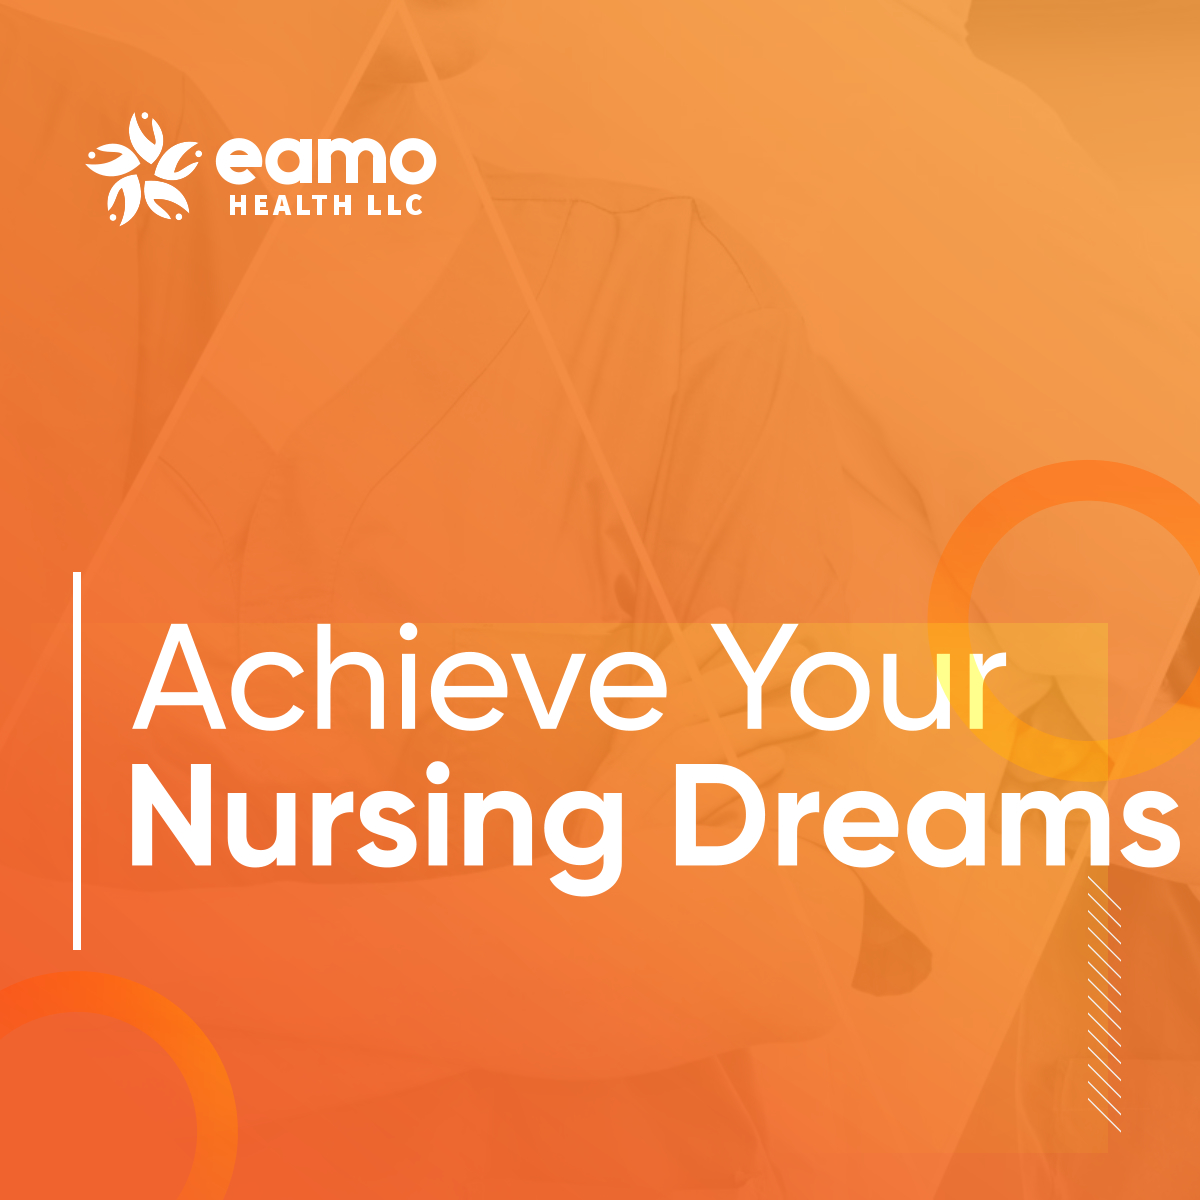 A lot of people dream of becoming a nurse and being able to practice it in the country. Although it is a long journey, there should be no limit to reaching for the dream that you want. Let us help you become a nurse.

#NursingDreams #WilmingtonDE #HealthcareTraining